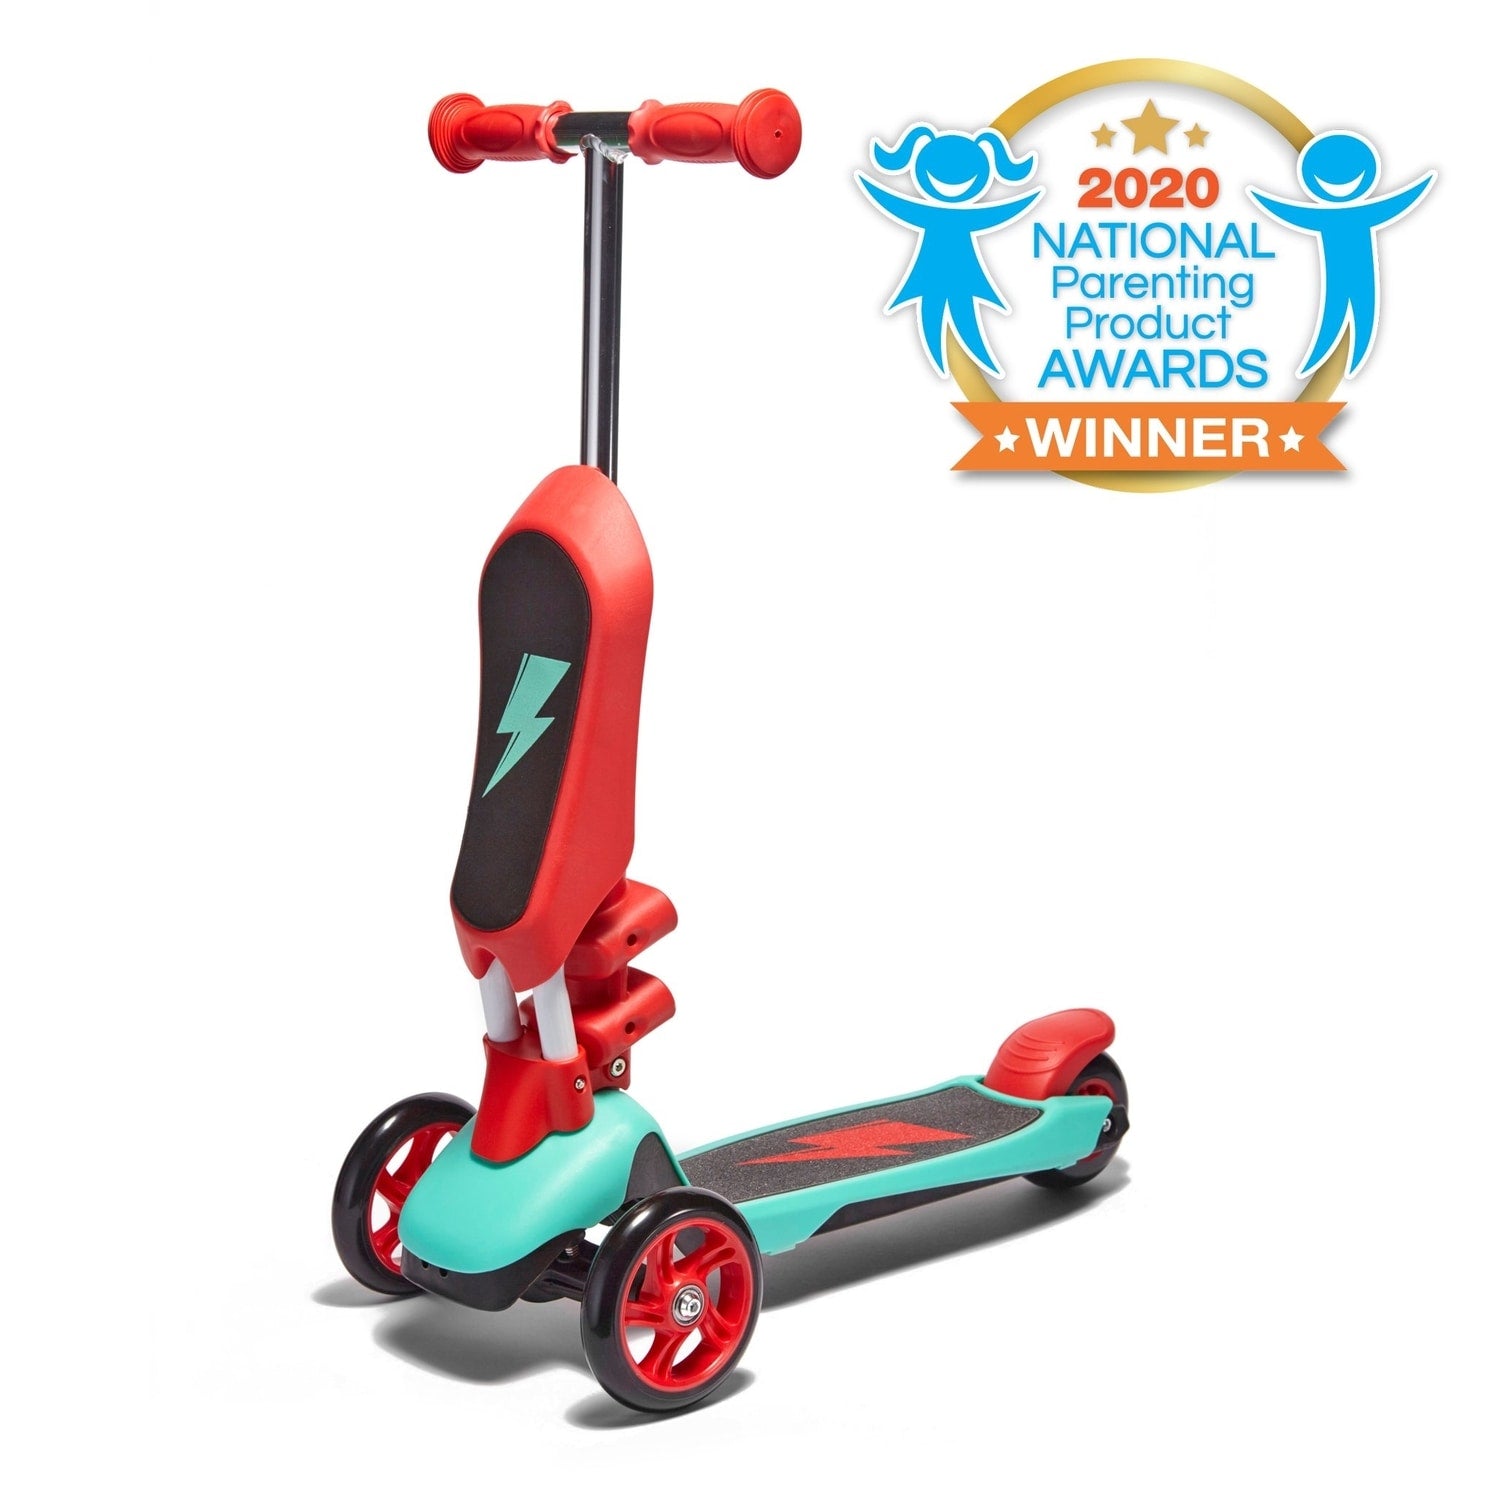 SVOLTA Sit and Stand Toddler Convertible Scooter Red